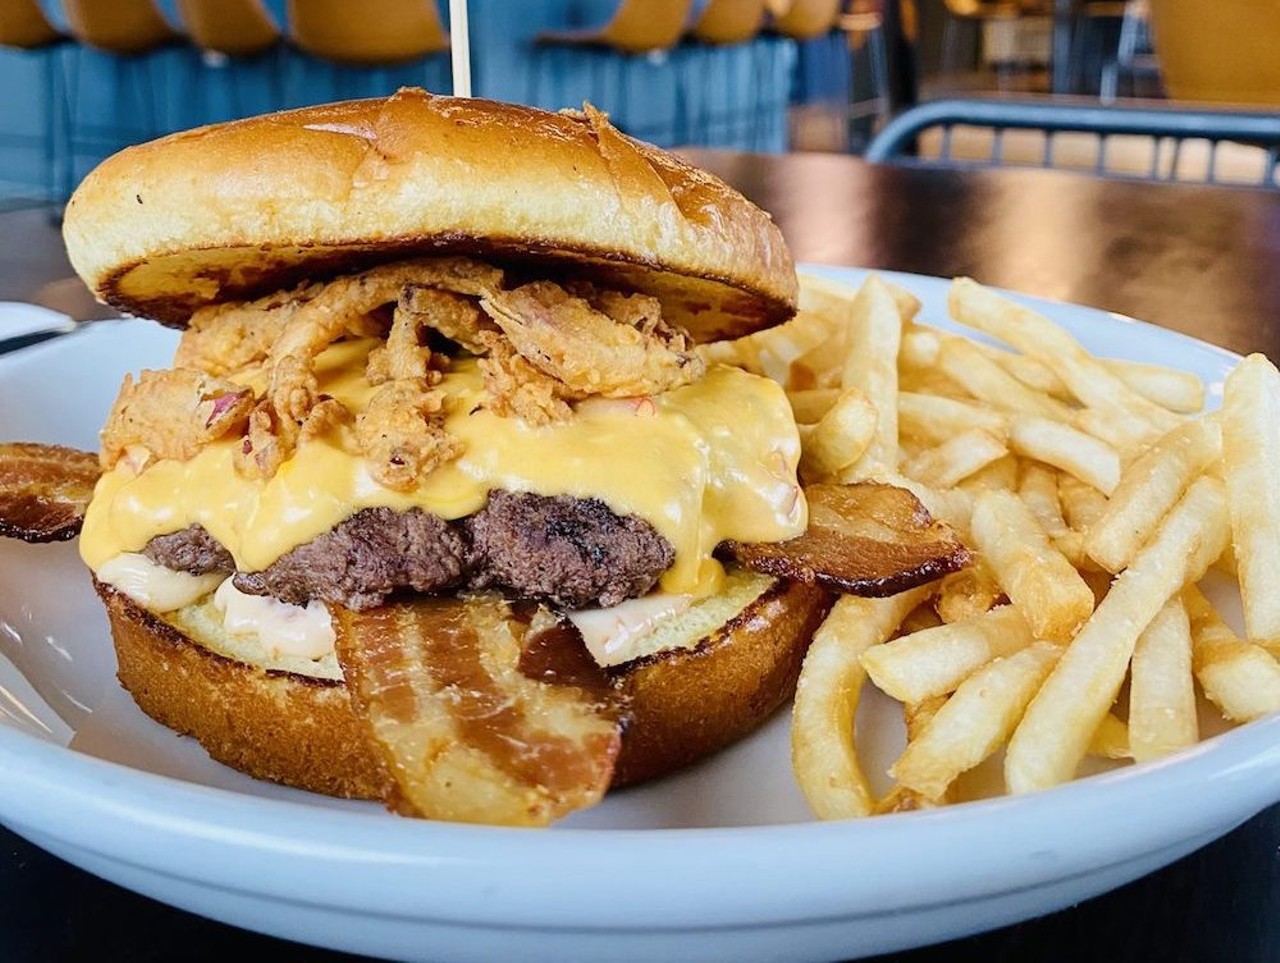 Cask Southern Kitchen & Bar
Just In Queso
Made with 1/3 pound smash burger, applewood smoked bacon, house-made pimento cheese queso, tomato, mayo, cask pickles, and crispy onions.